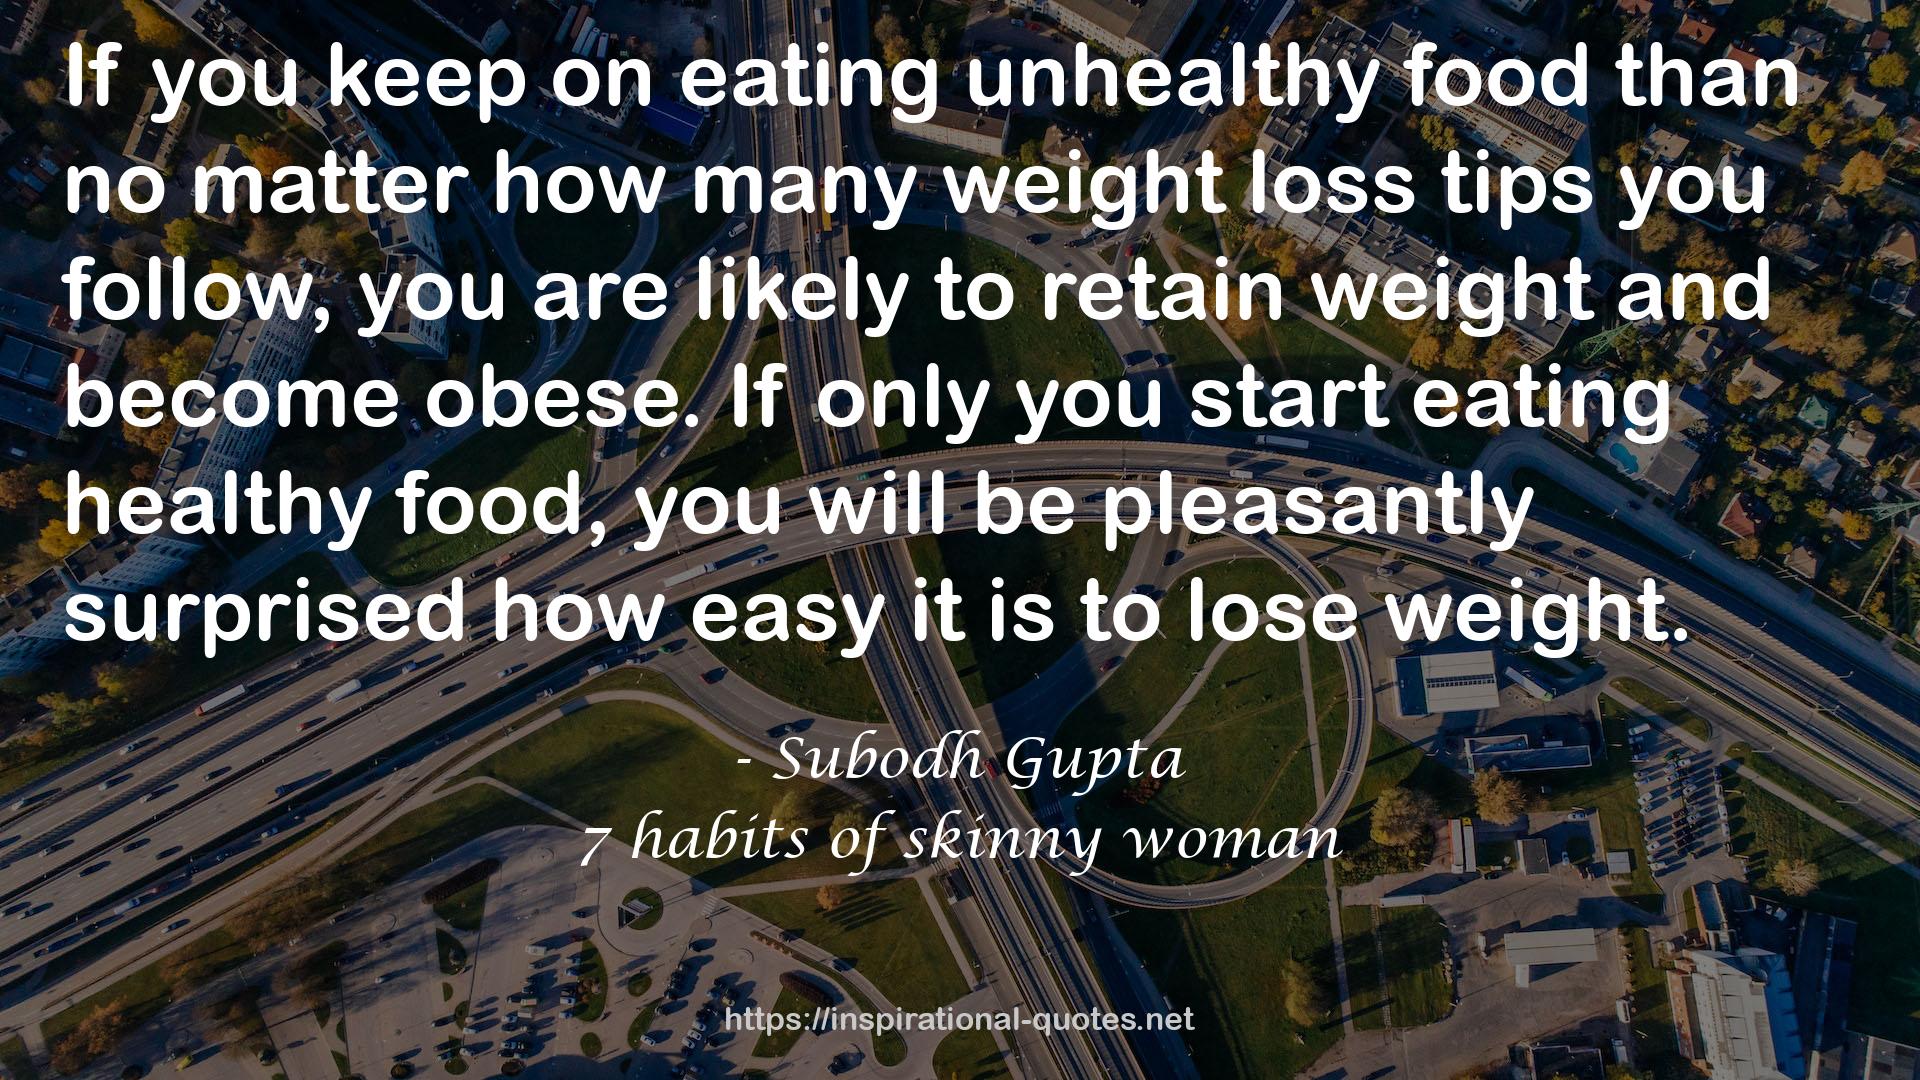 7 habits of skinny woman QUOTES